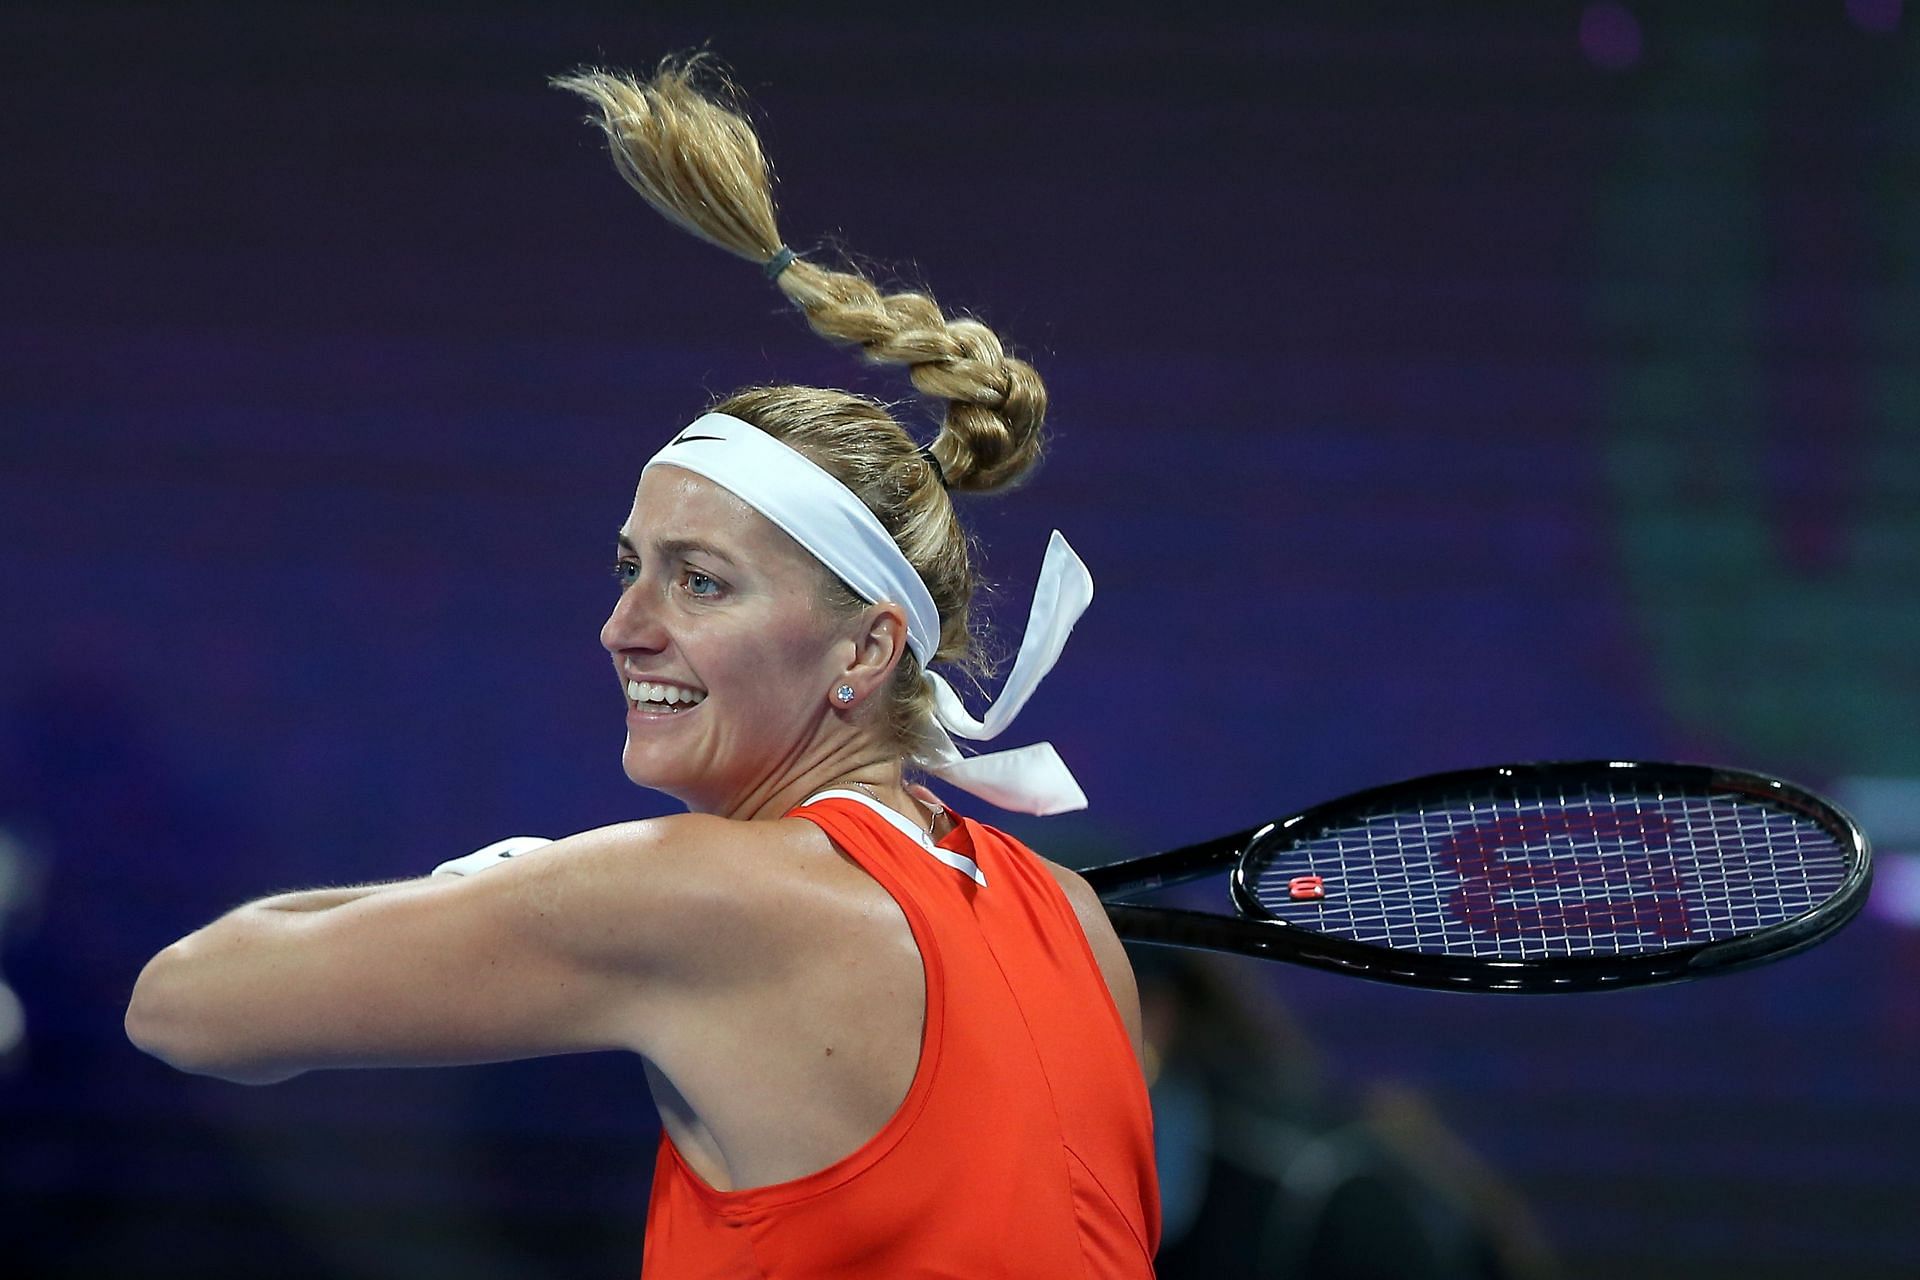 Kvitova will look to take control of the match using her powerful groundstrokes.